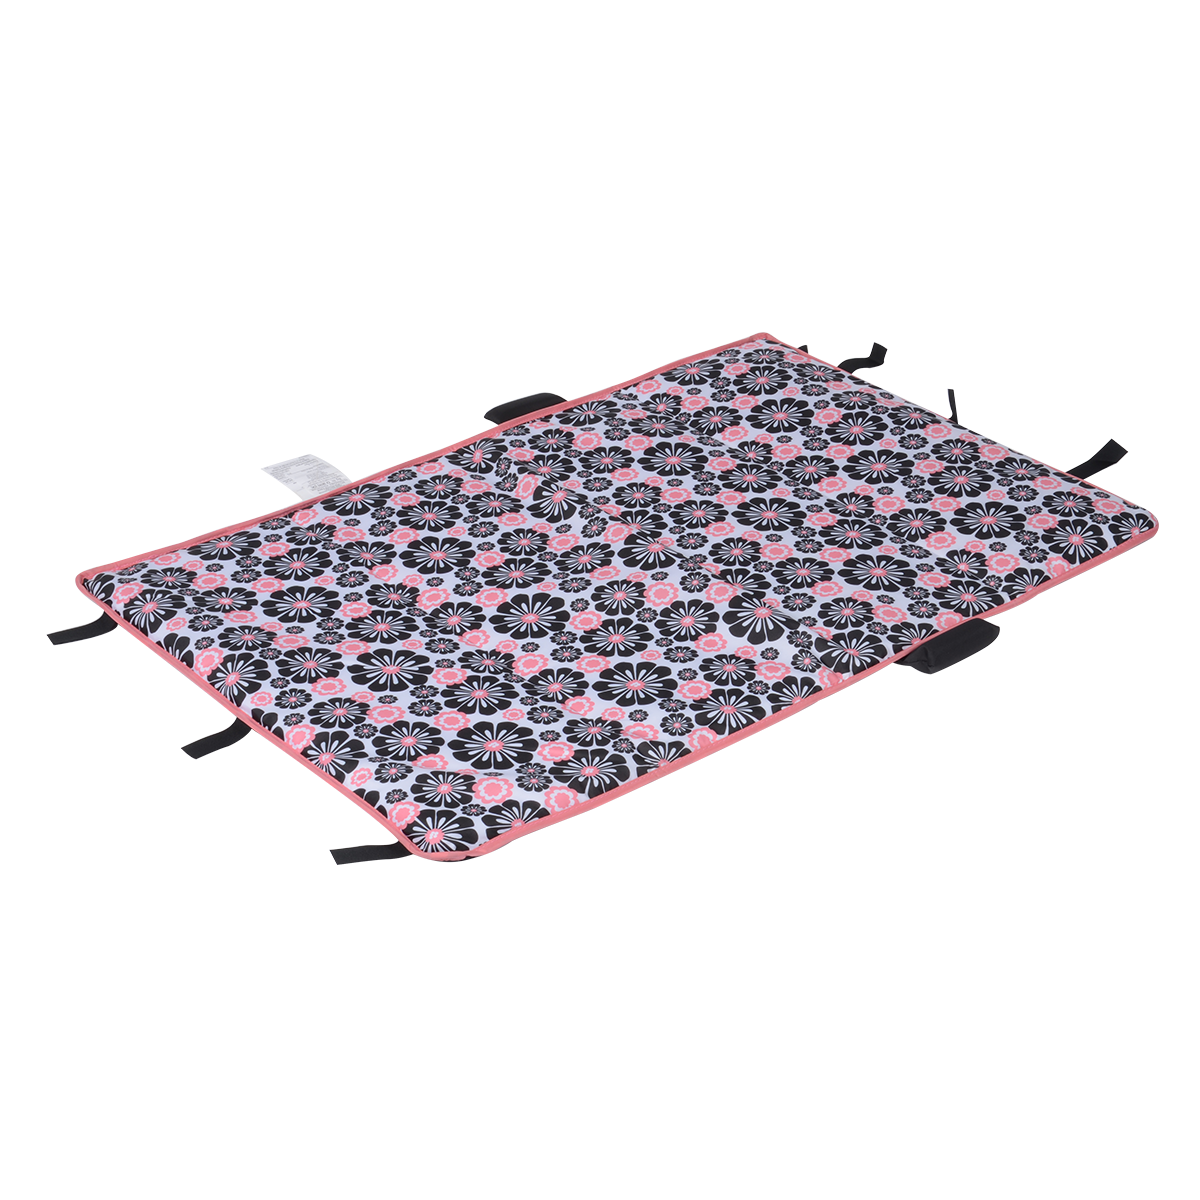 BabySuite DLX Play Yards Replacement